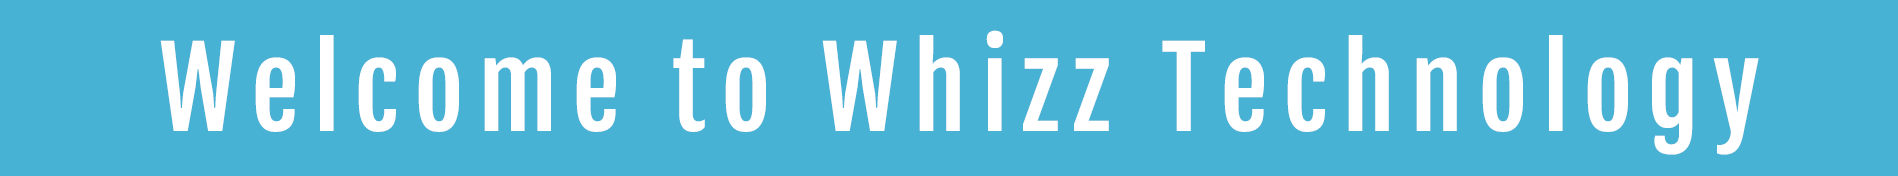 Welcome to Whizz Technology